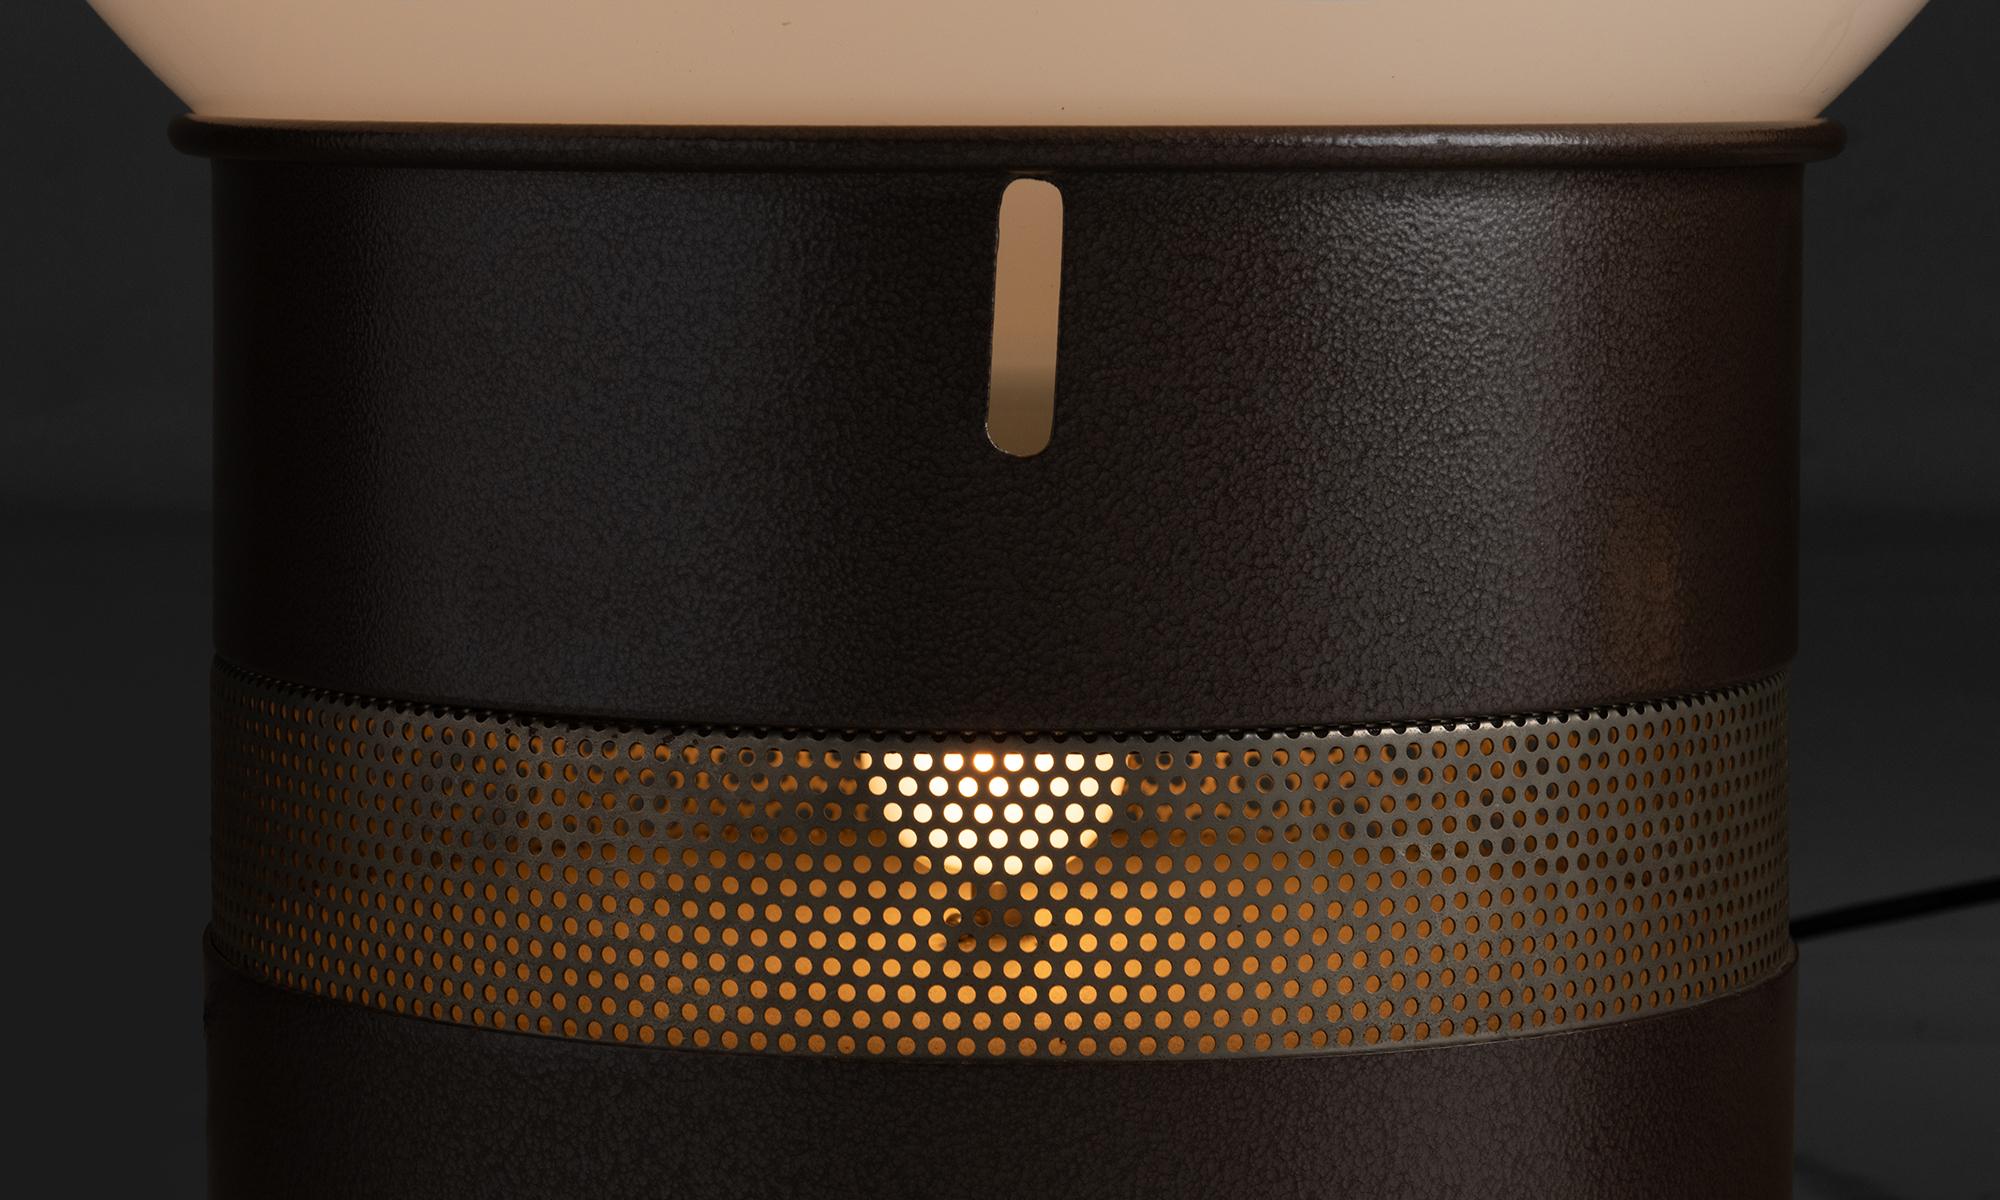 Gae Aulenti Table Lamps

Italy circa 1960

Oracolo table lamp, Opaline globe on enameled aluminum tubular base with perforated steel band.

21”dia x 25”h